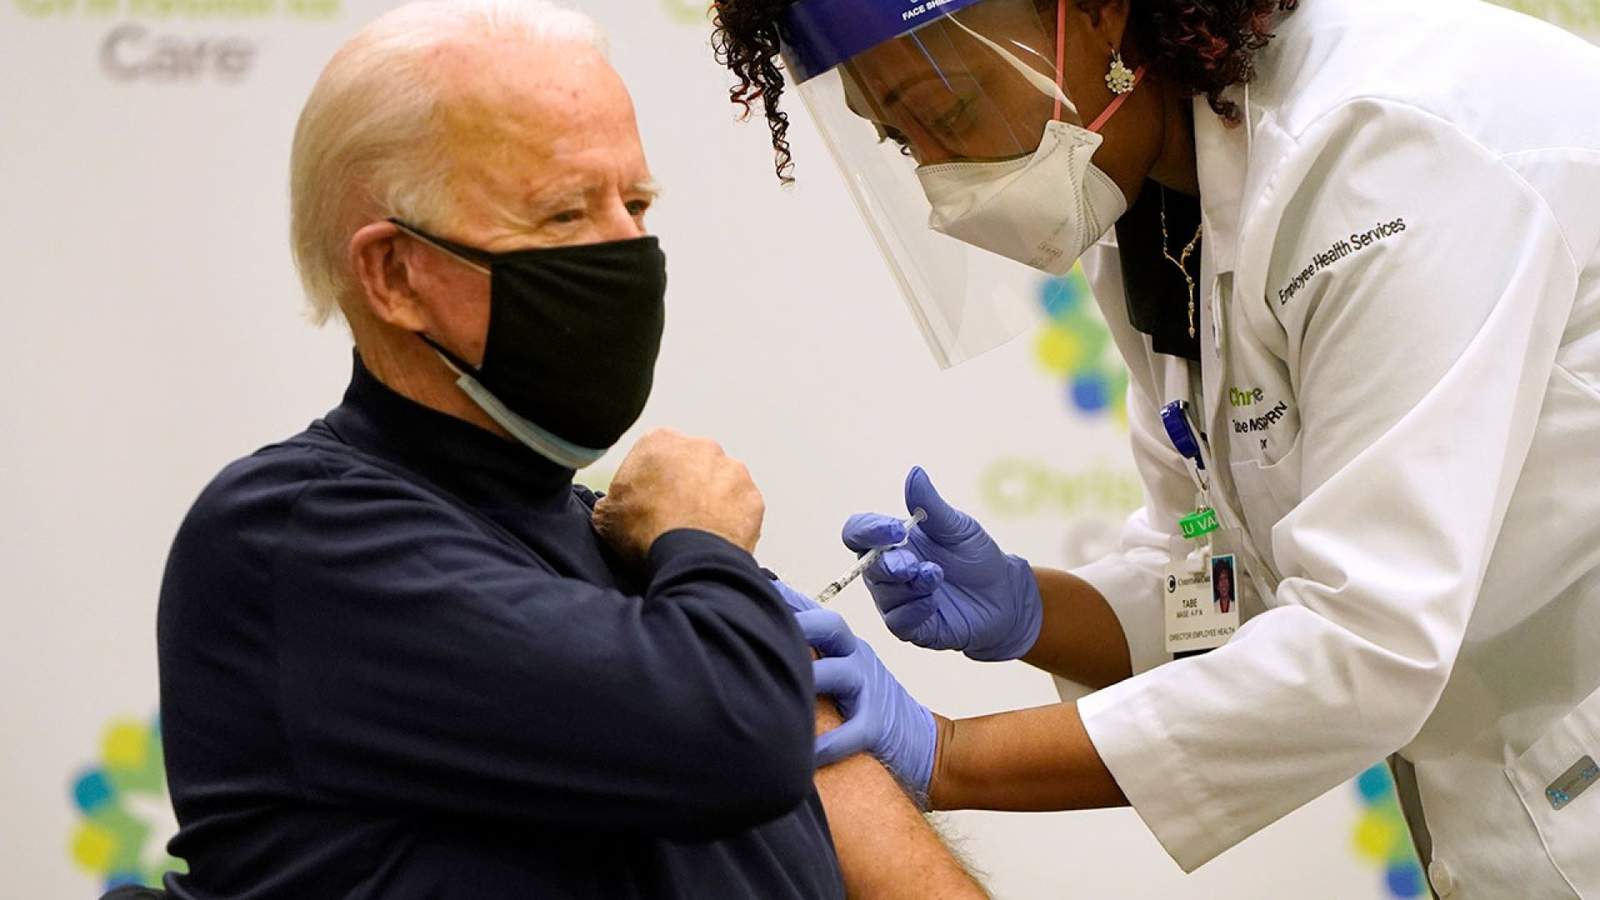 Biden gets COVID-19 vaccine, says ‘nothing to worry about’